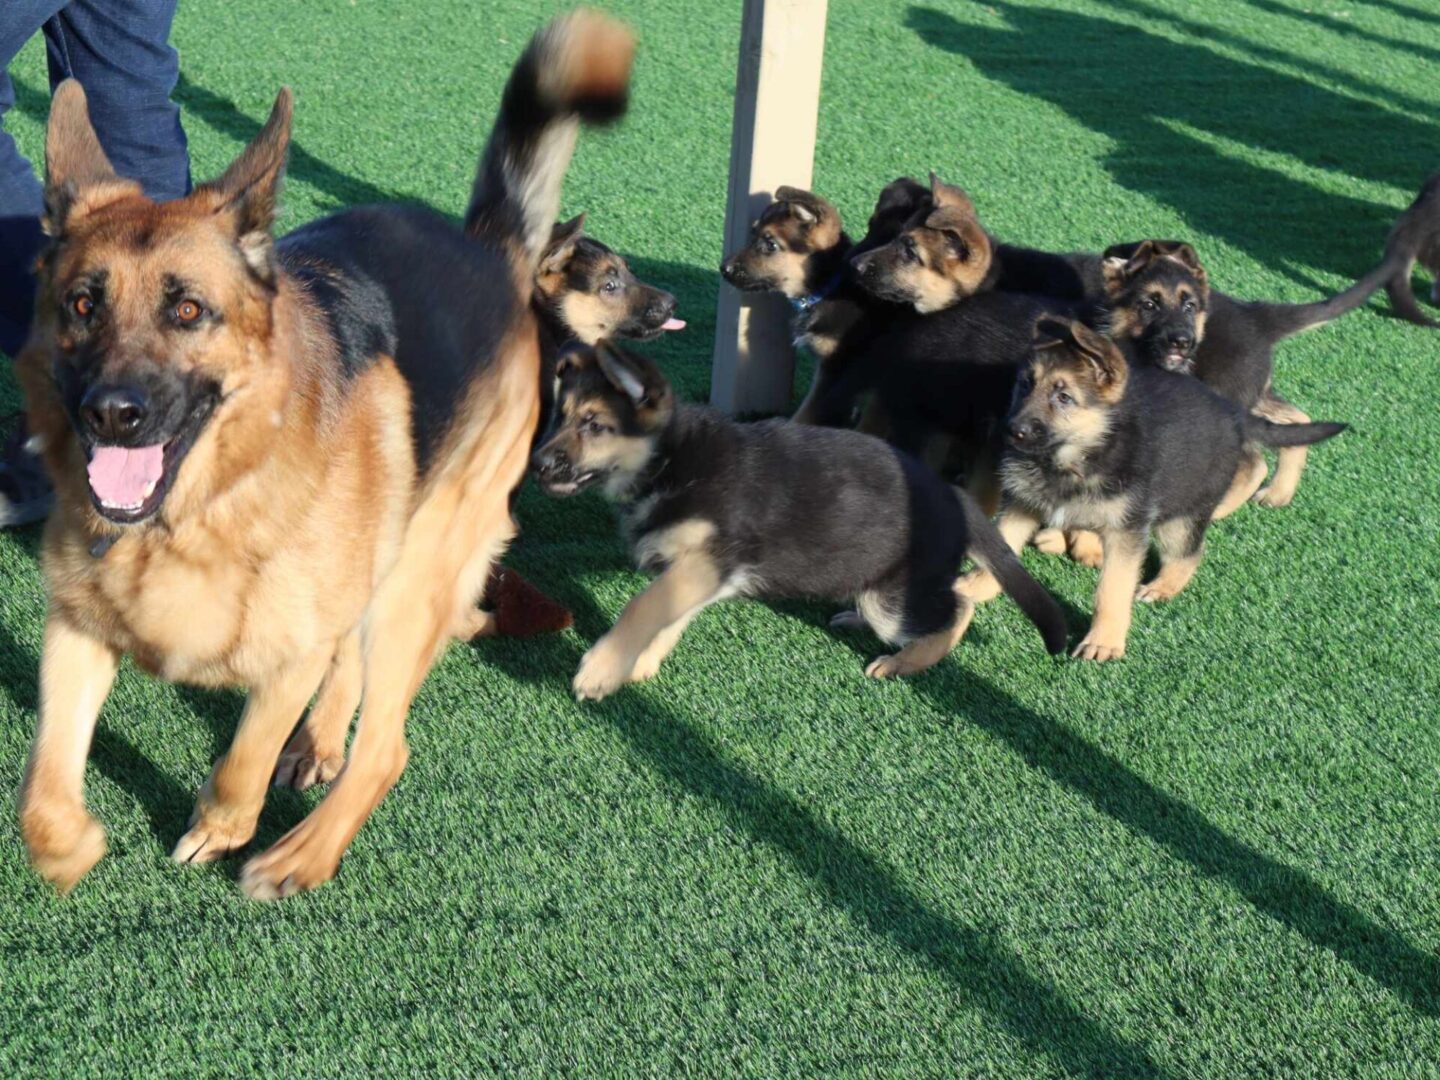 A dog and her puppies are running together.